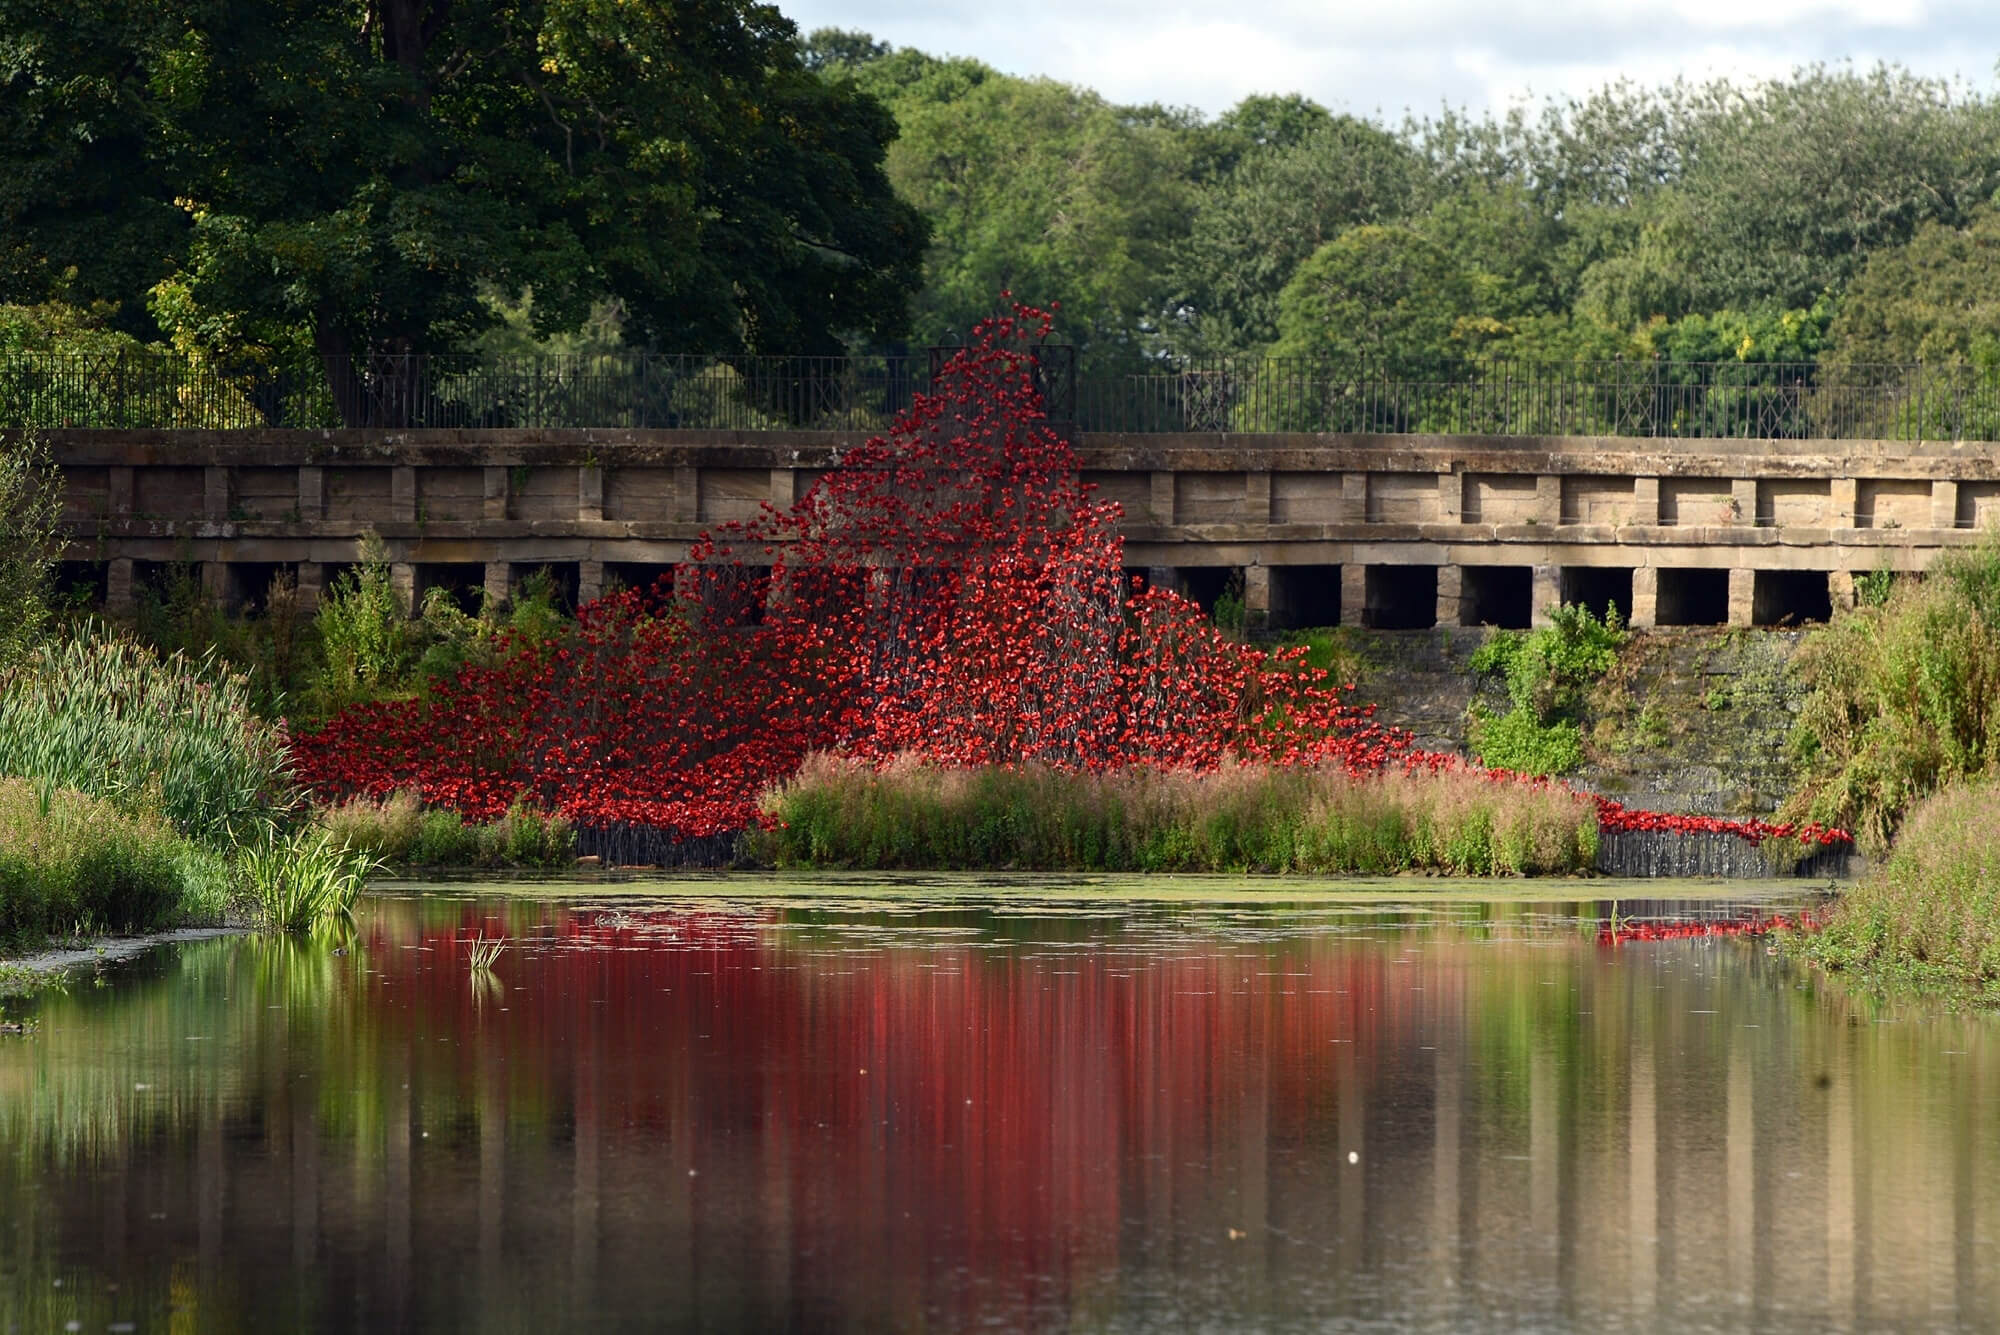 A cascade of red poppies flowing over a bridge into a lake.